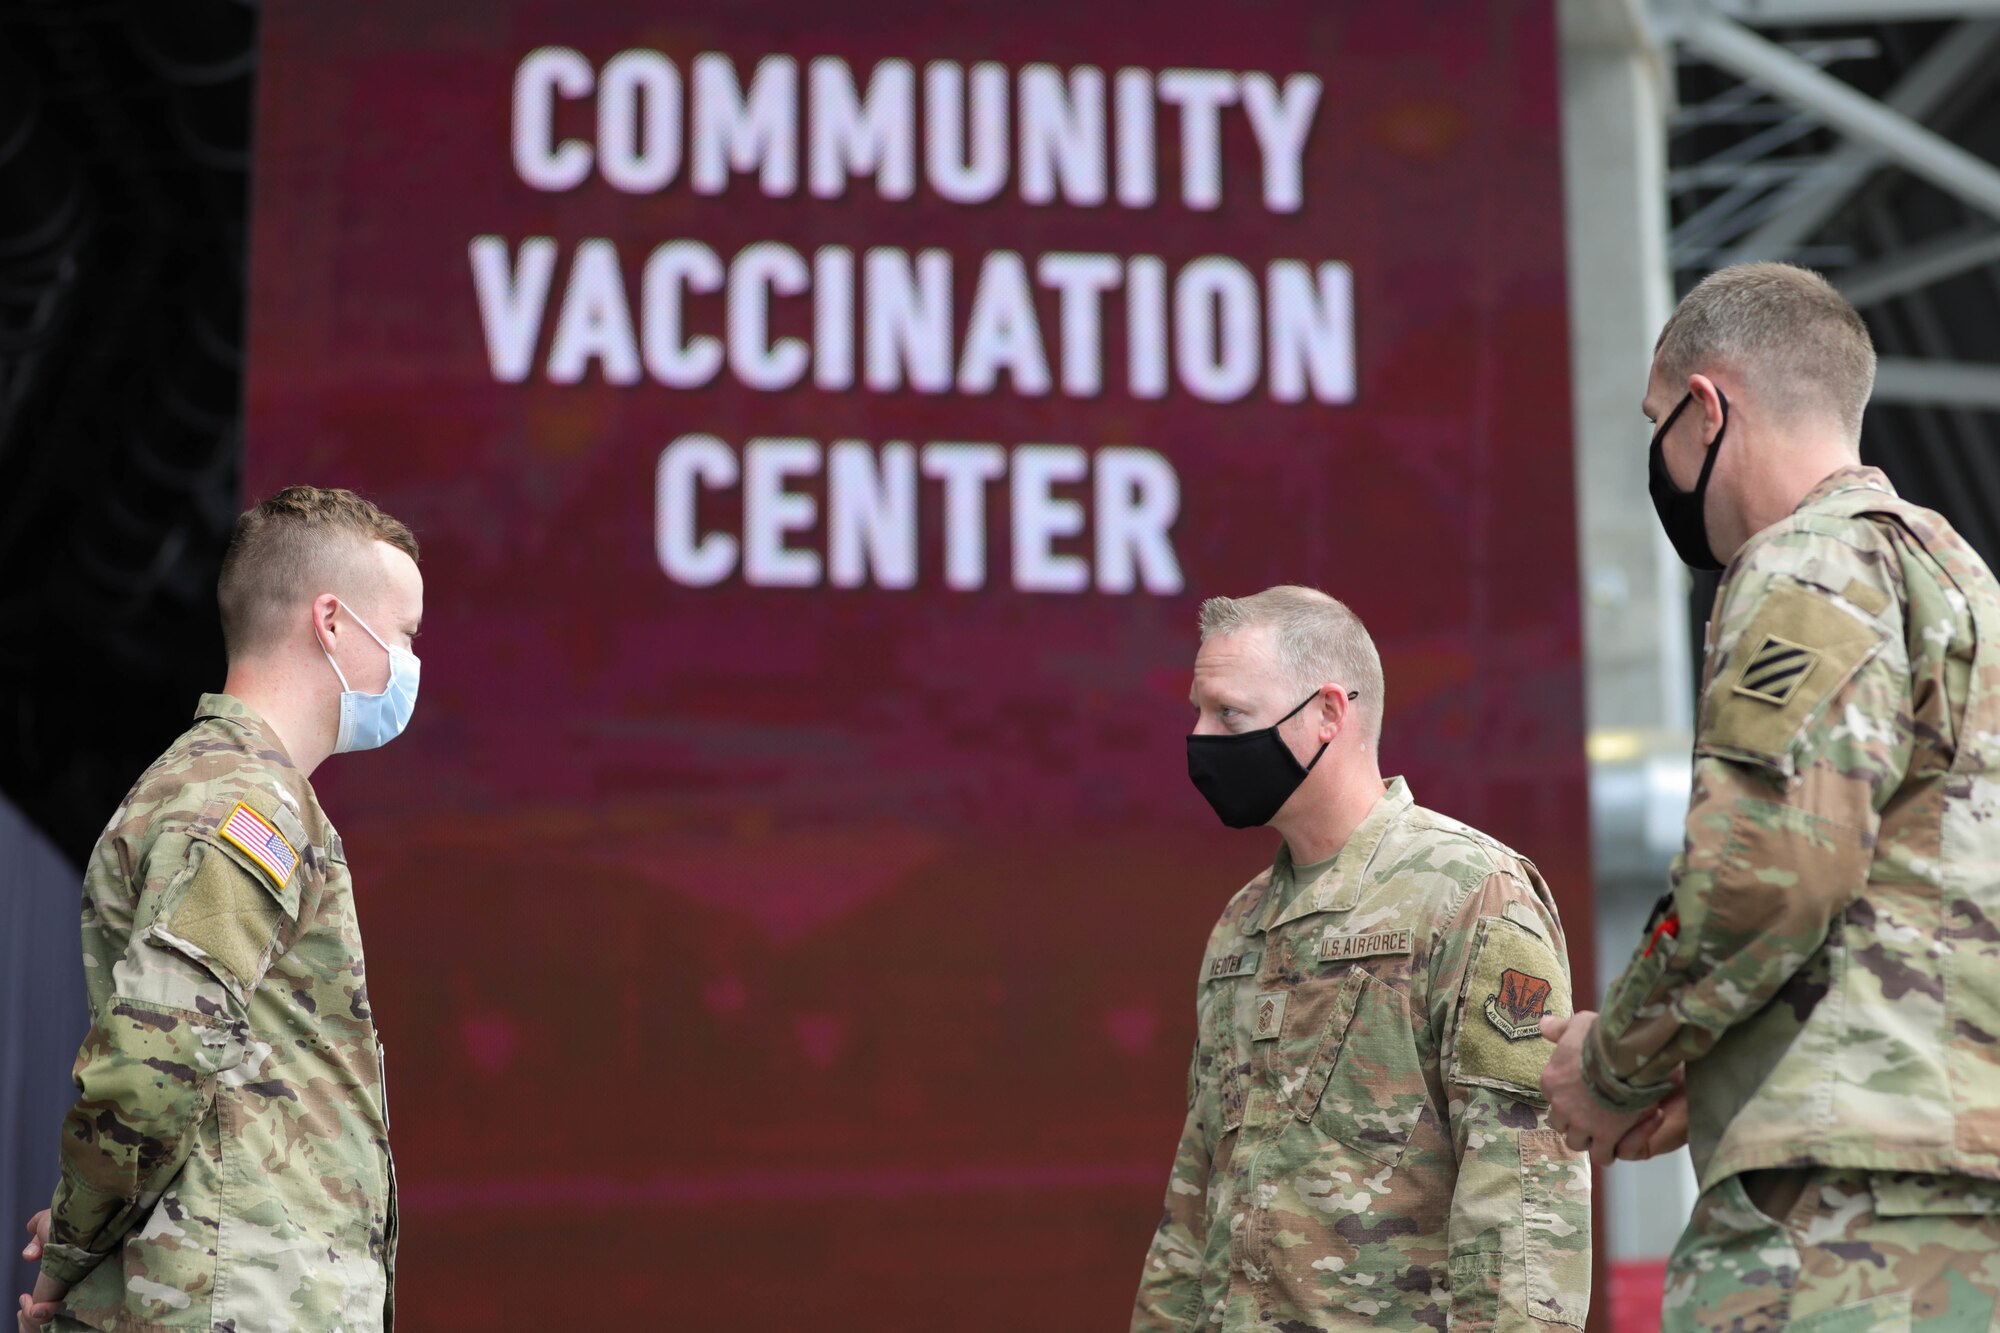 15th Air Force Command Chief visits Atlanta Community Vaccination Center